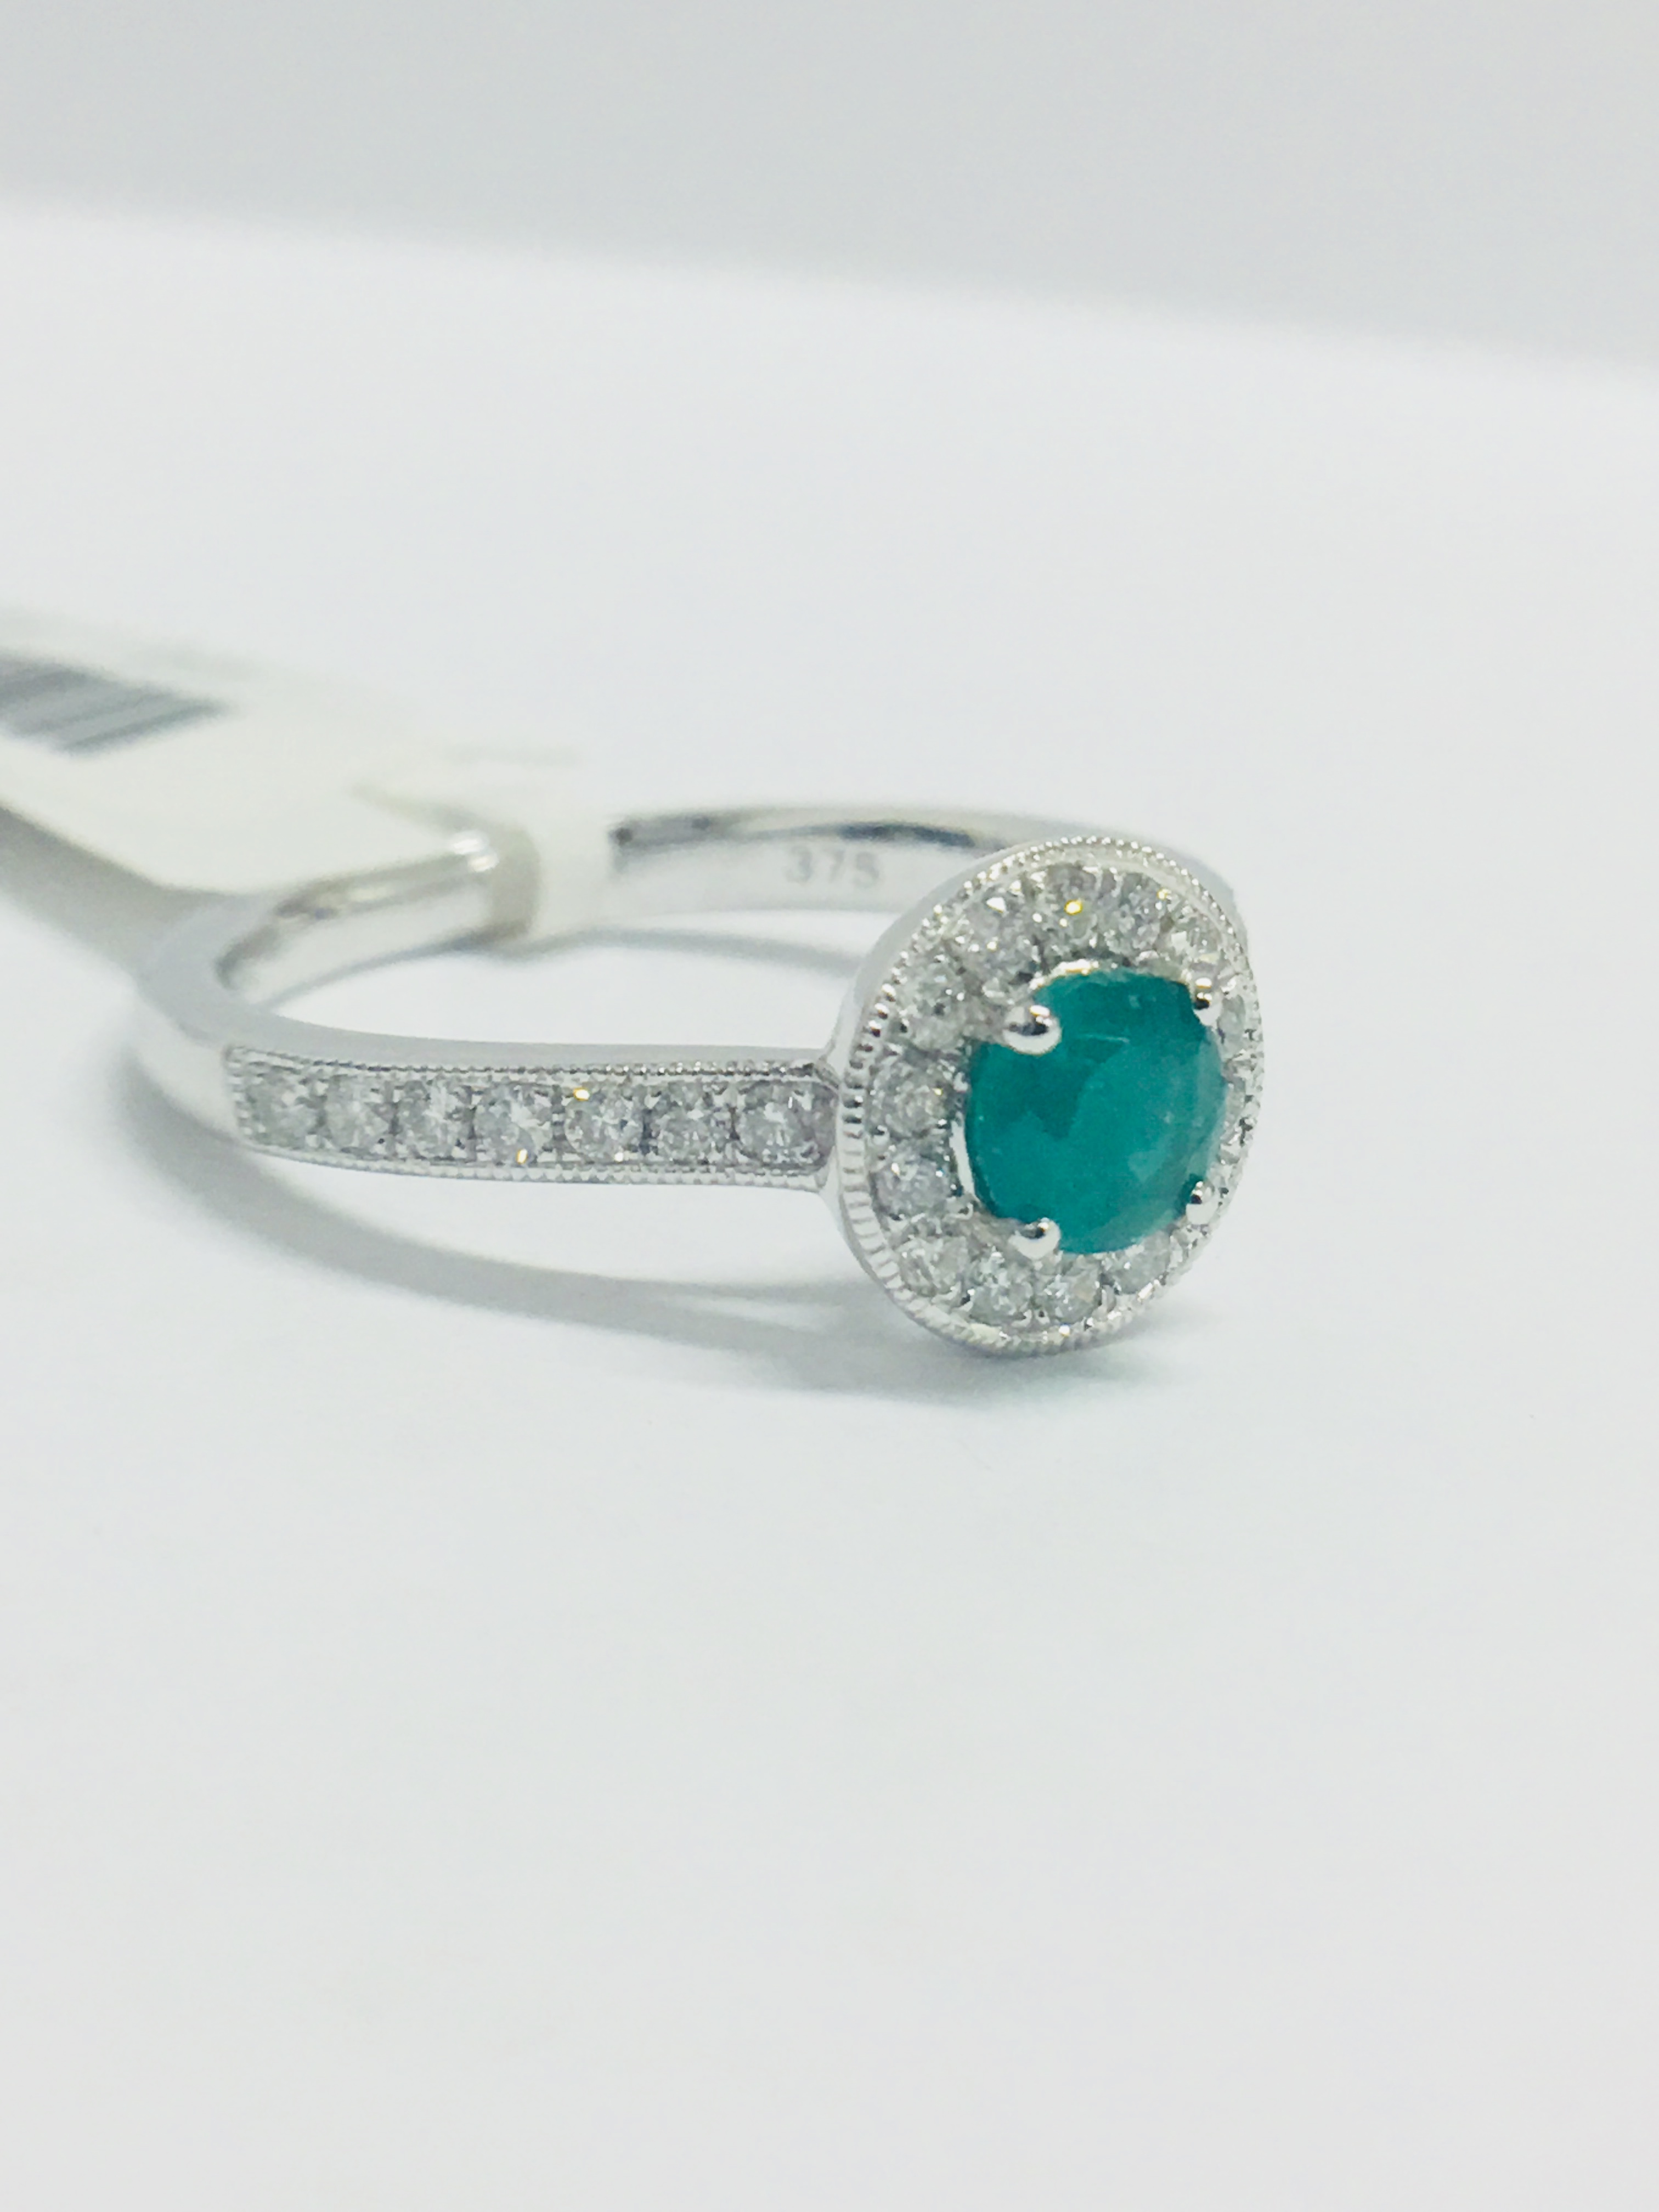 9Ct White Gold Emerald Diamond Cluster Ring, - Image 6 of 7